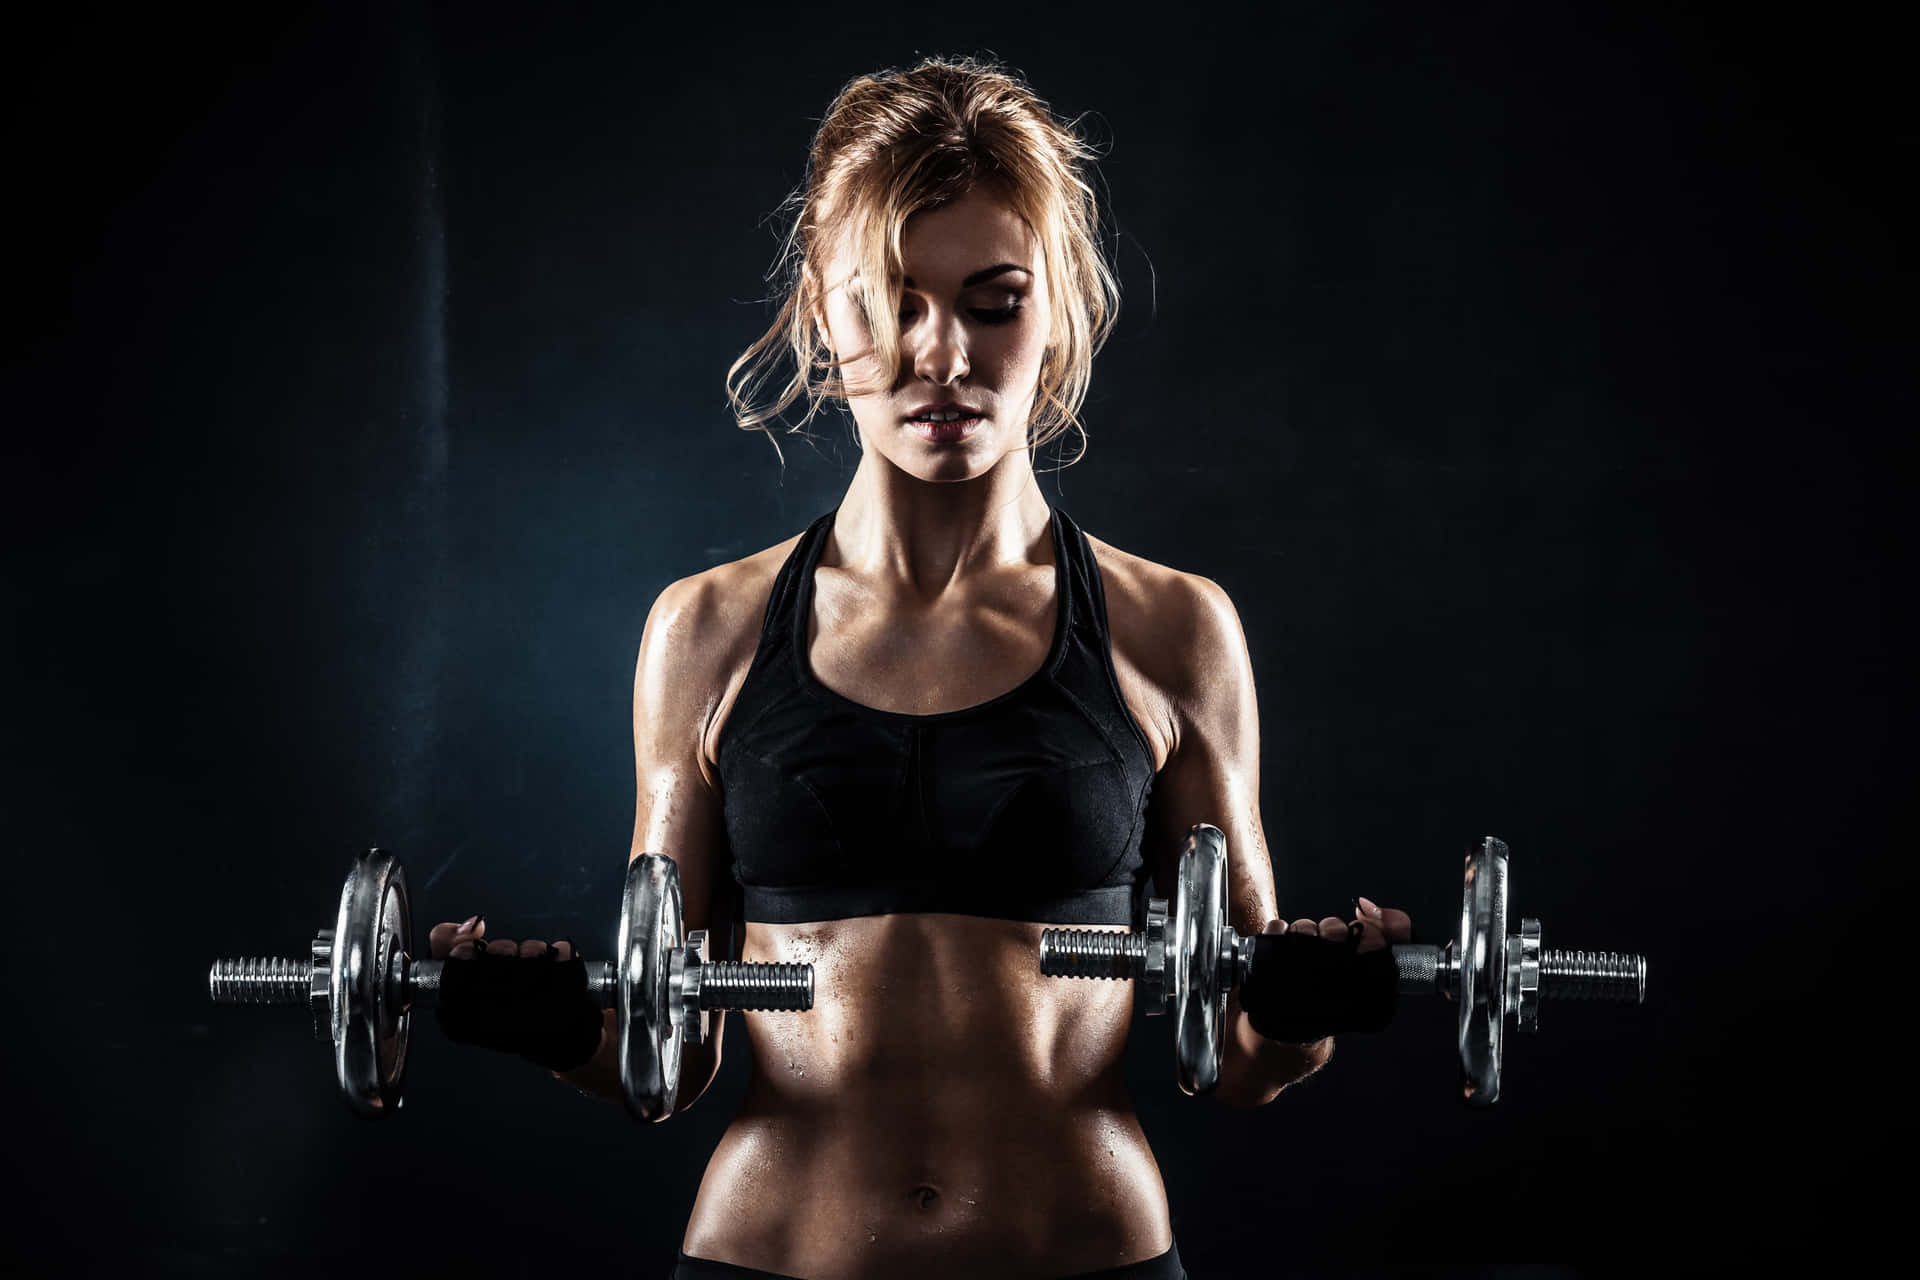 Woman In Sexy Pose With Weights Wallpaper